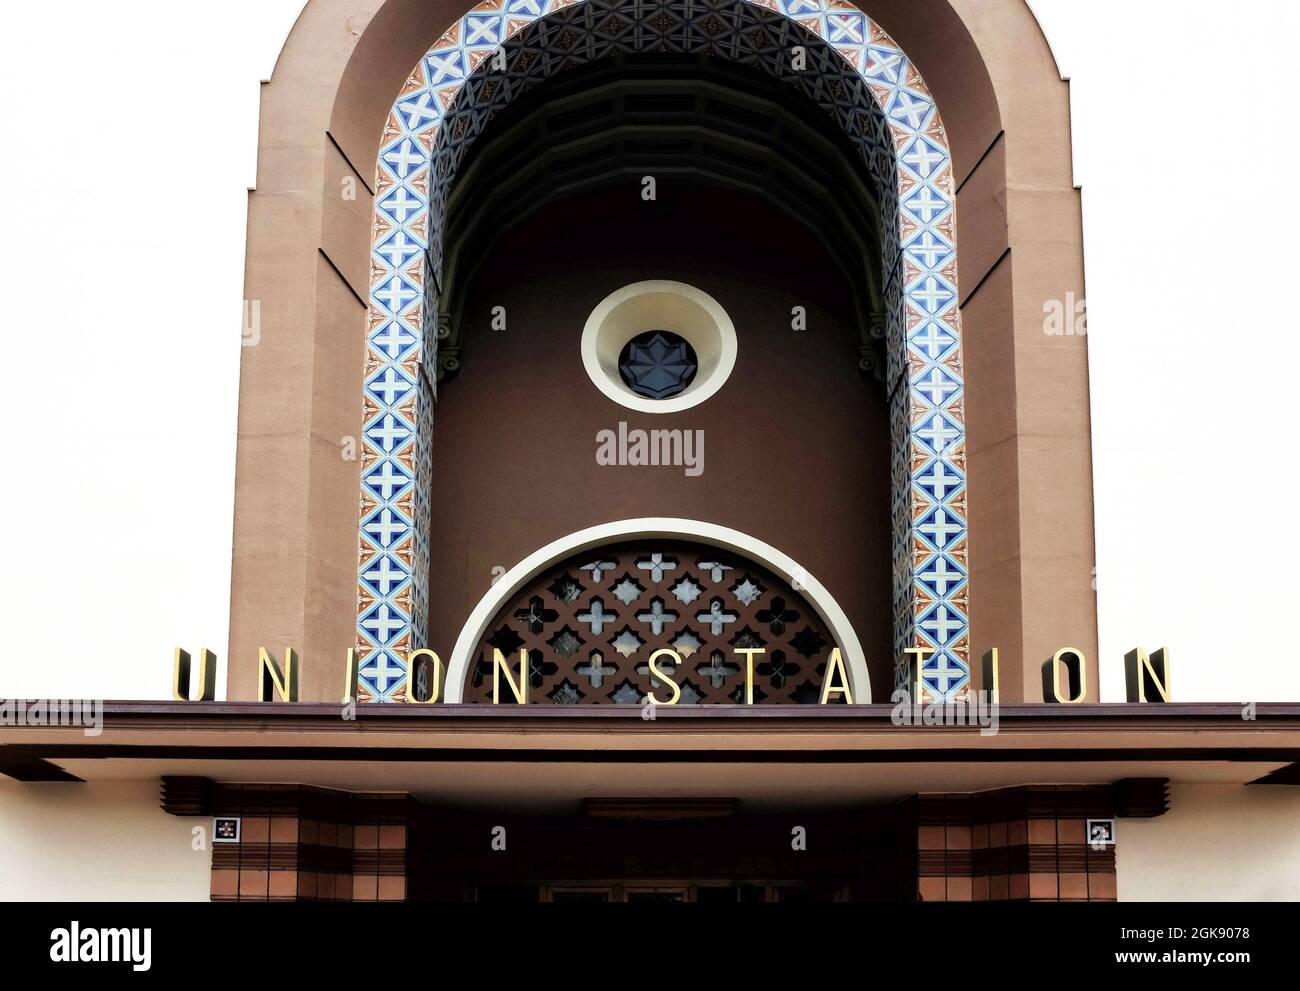 LOS ANGELES, CALIFORNIA - 18AUG 2021: Union Station sign over the Main Entrance. Stock Photo